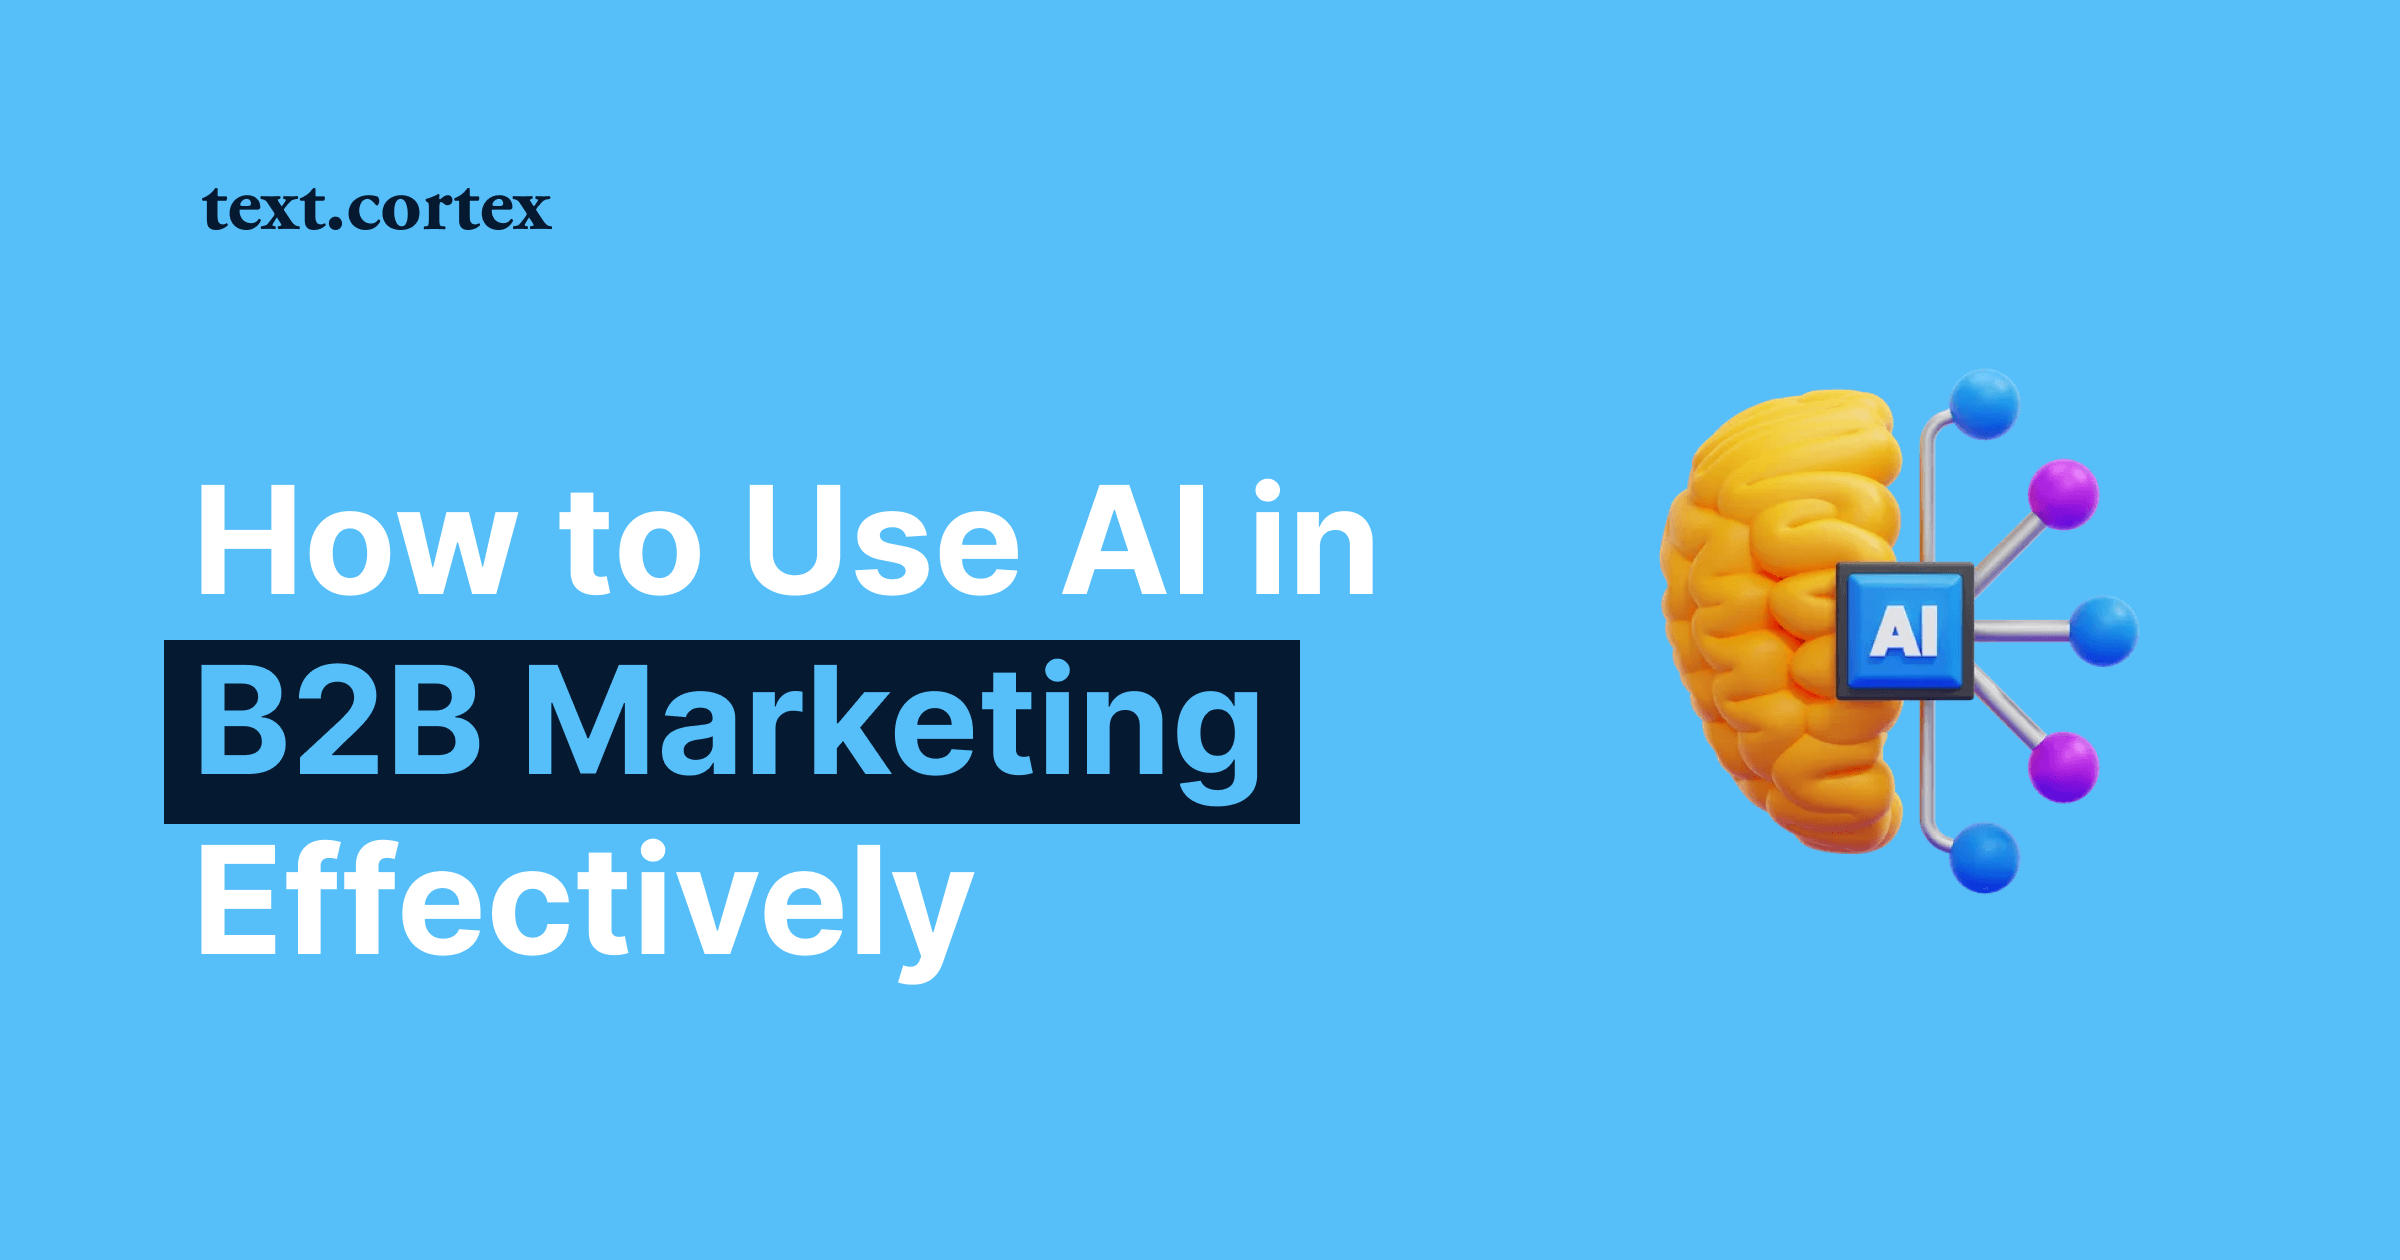 How to Use AI in B2B Marketing Effectively